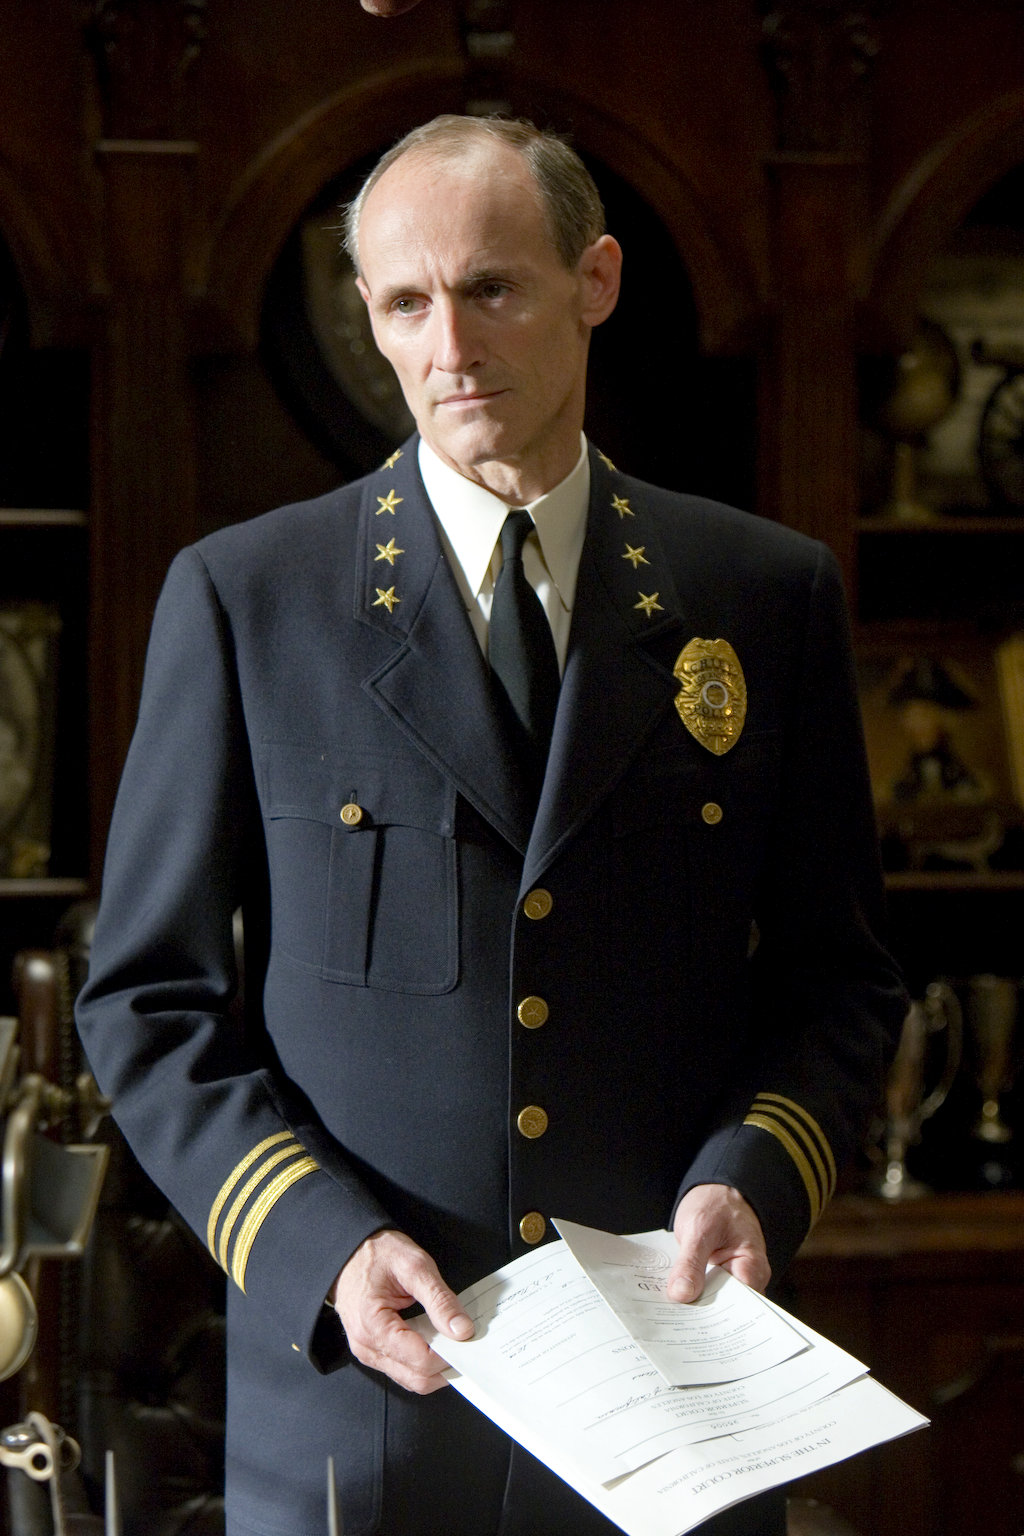 Colm Feore stars as Chief James E. Davis in Universal Pictures' Changeling (2008)